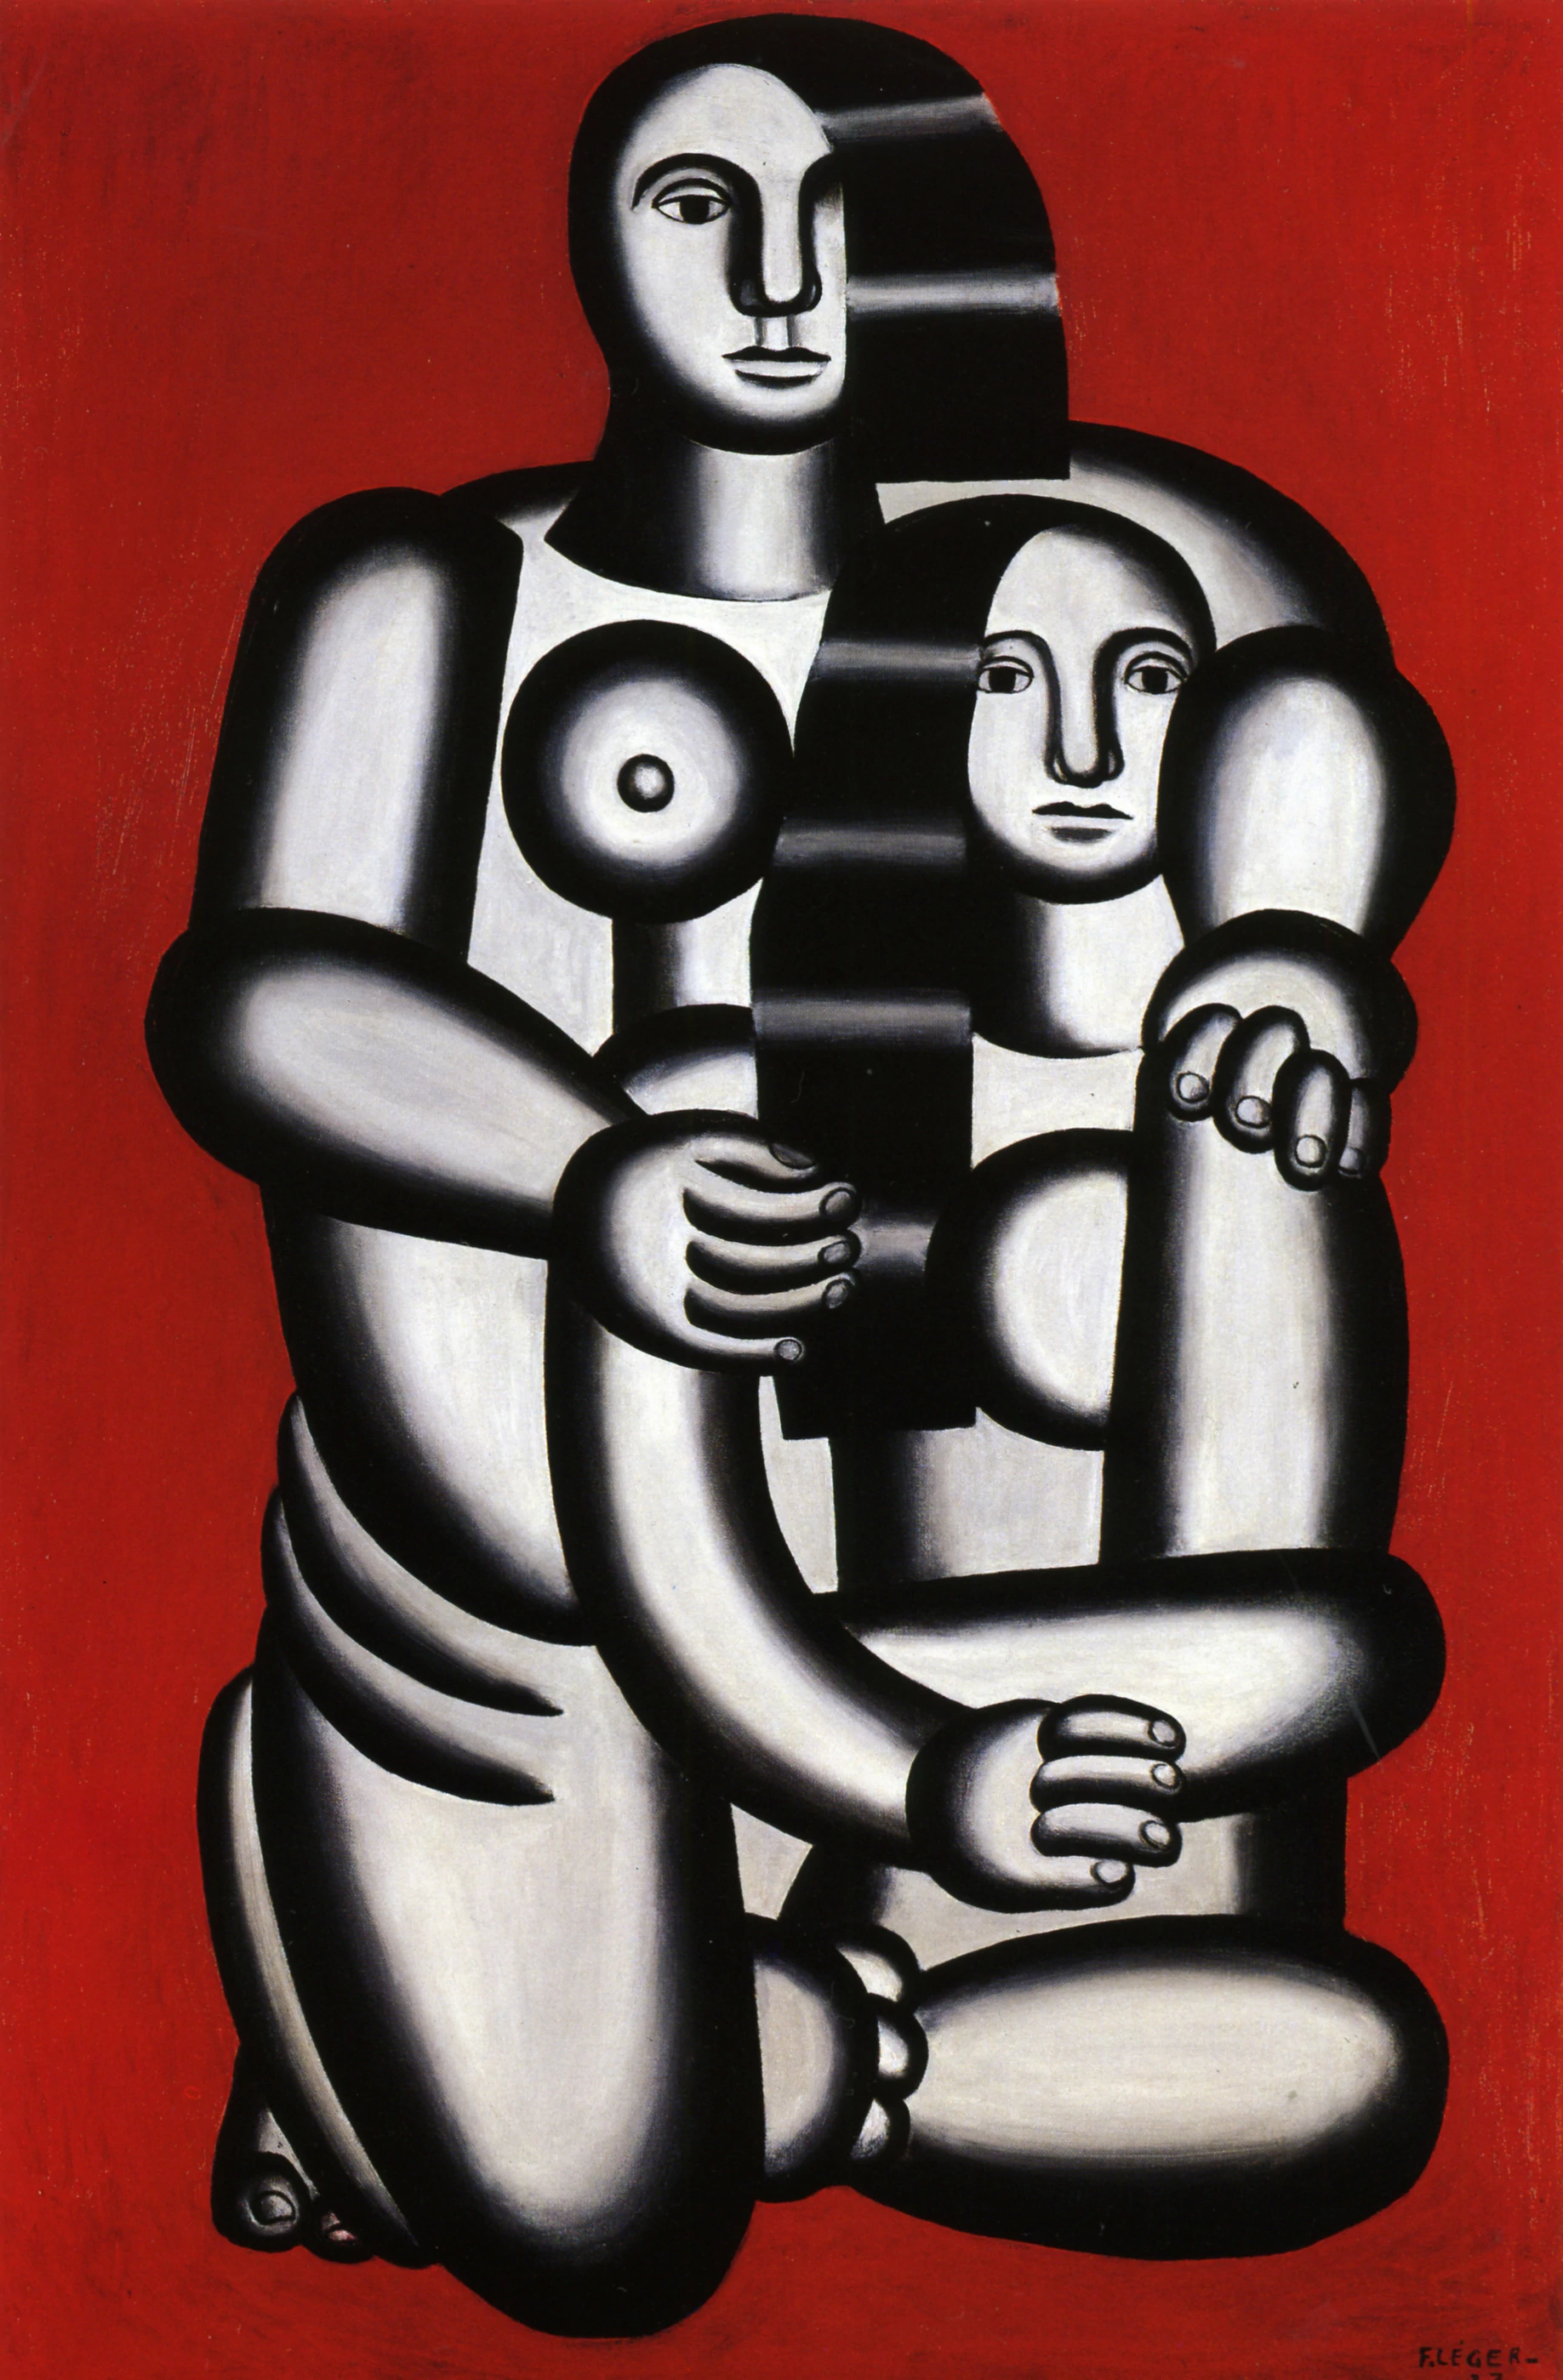 Two Figures (Nudes on a red background), Fernand Henri Léger